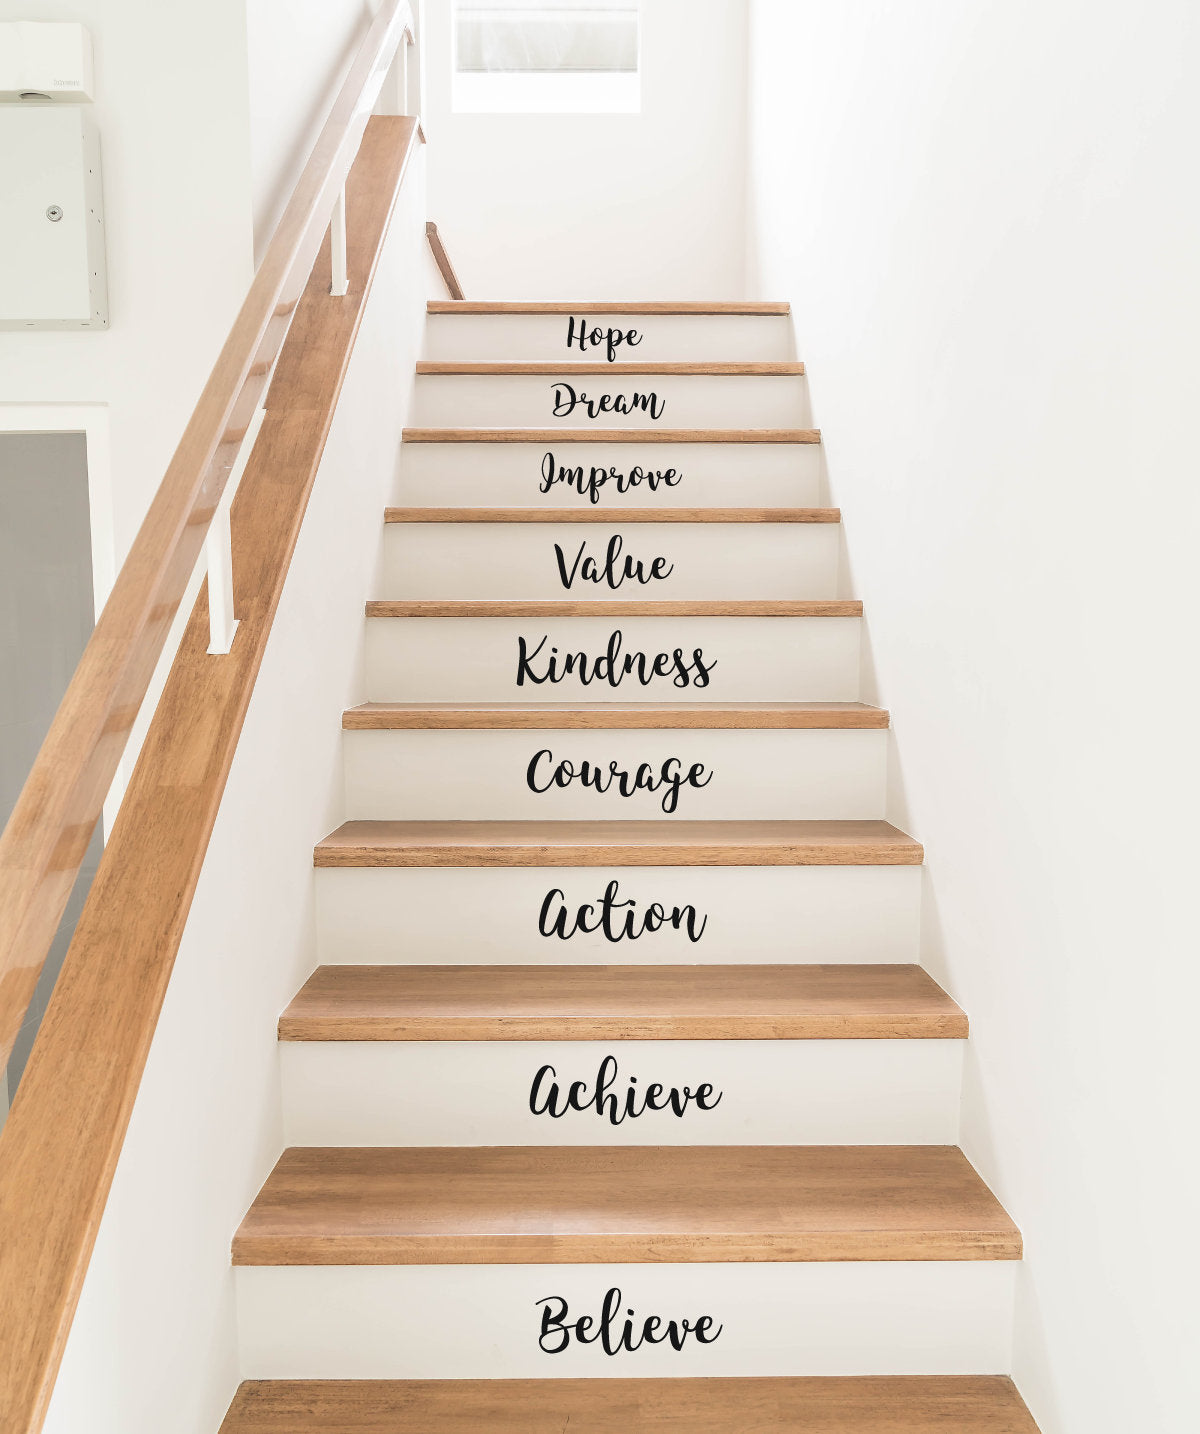 Stair Stickers, Stair Decals, Motivational, Quotes Stickers, Quote Decals, Stair Art, Stair Murals, Stair Quotes, Home Decor, Wall Art, 7001